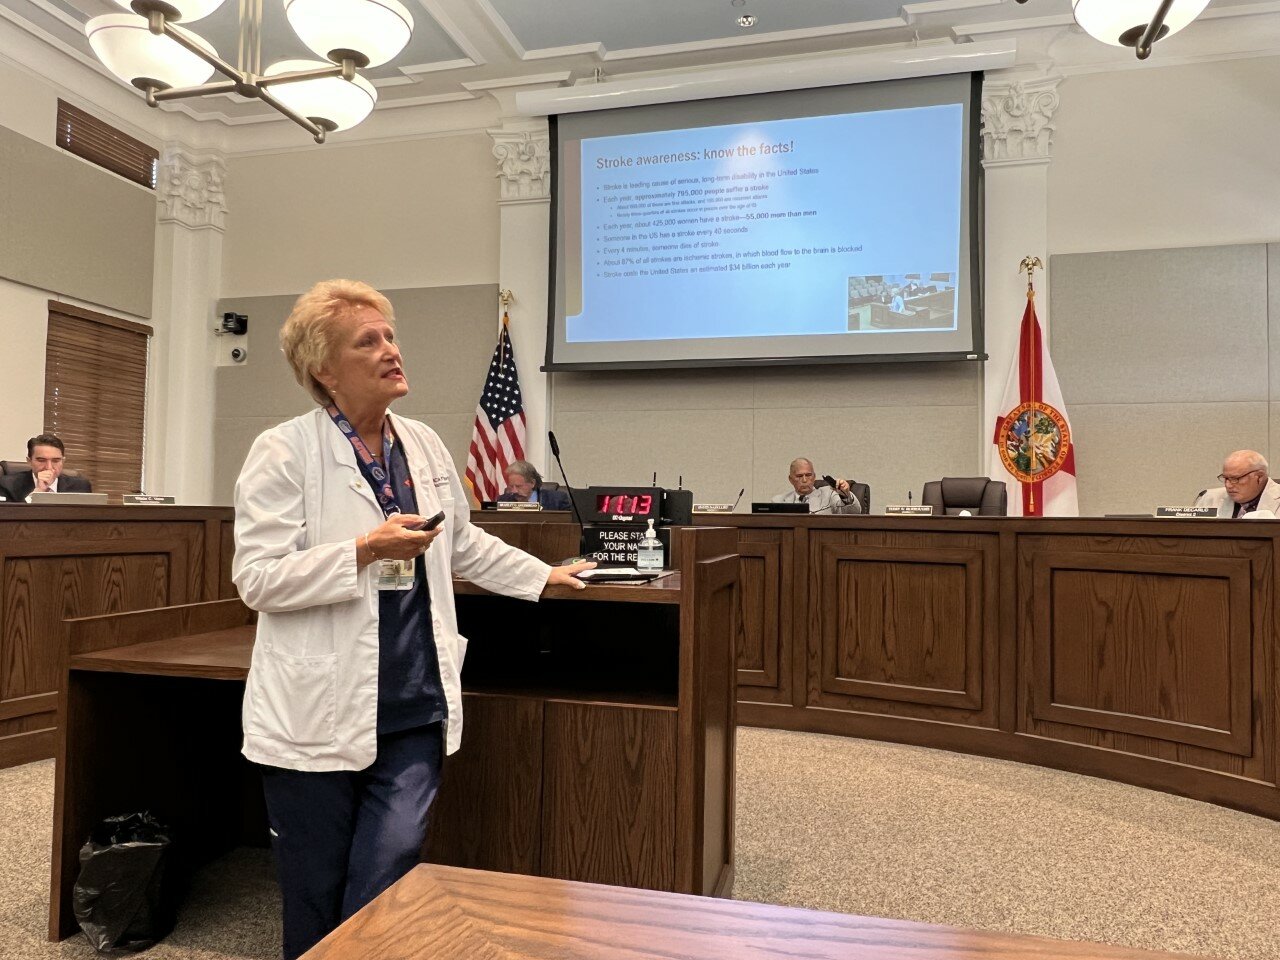 OKEECHOBEE  -- HCA Raulerson Hospital Emergency Management Director Kathleen Selby explained the signs of stroke at the May 11 meeting of the Okeechobee County Commission in the Historic Okeechobee County Courthouse.